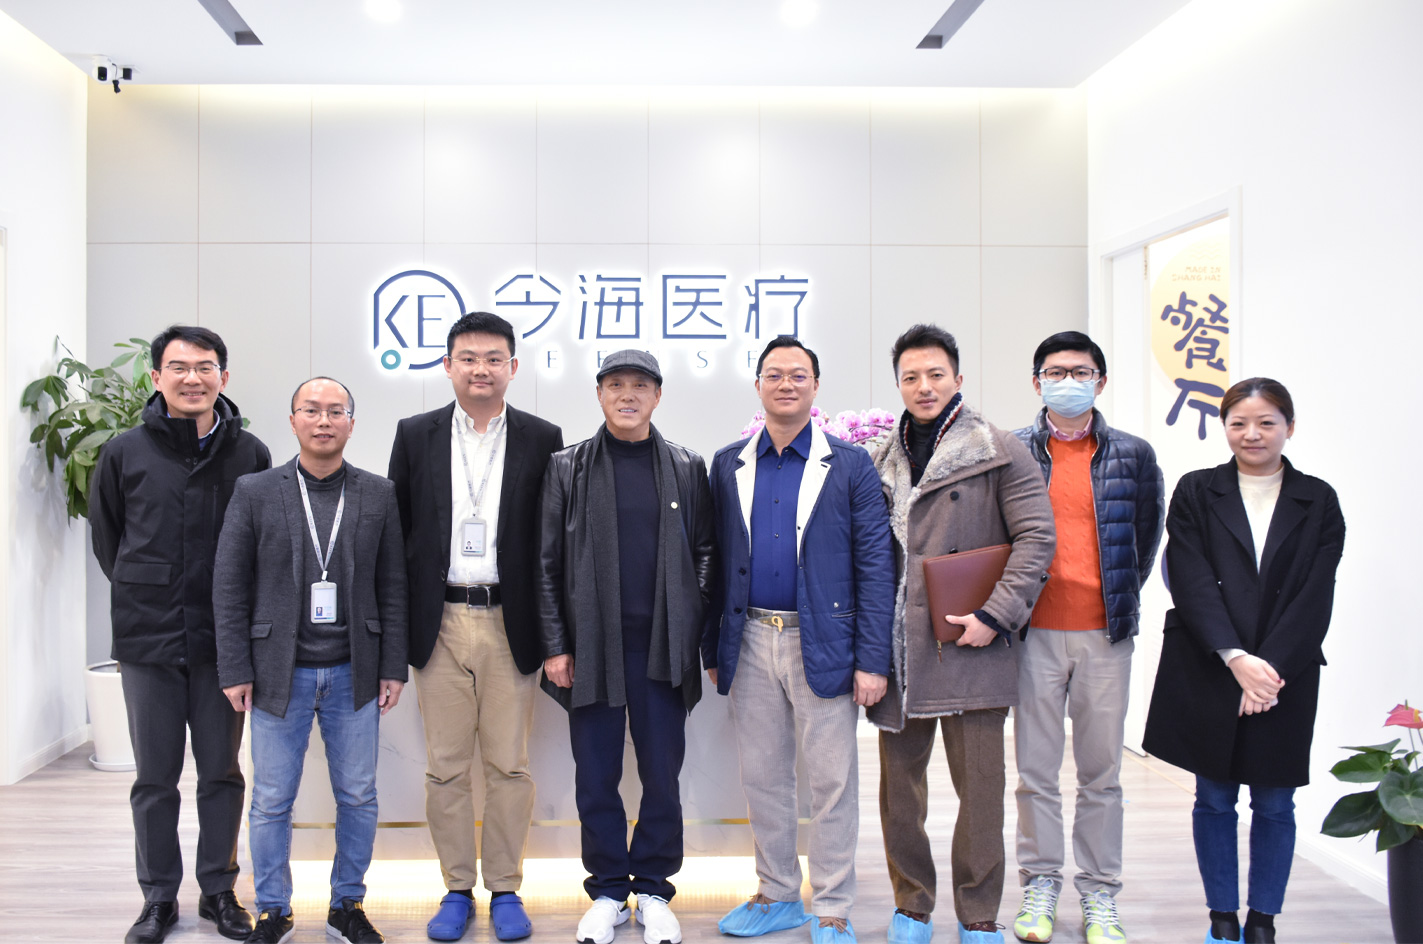 Zhuo Fumin's Executive President led the team into Keensea GroupZhuo Fumin's Executive President led the team into Keensea GroupZhuo Fumin's Executive President led the team into Keensea GroupZhuo Fumin's Executive President led the team into Keensea Group